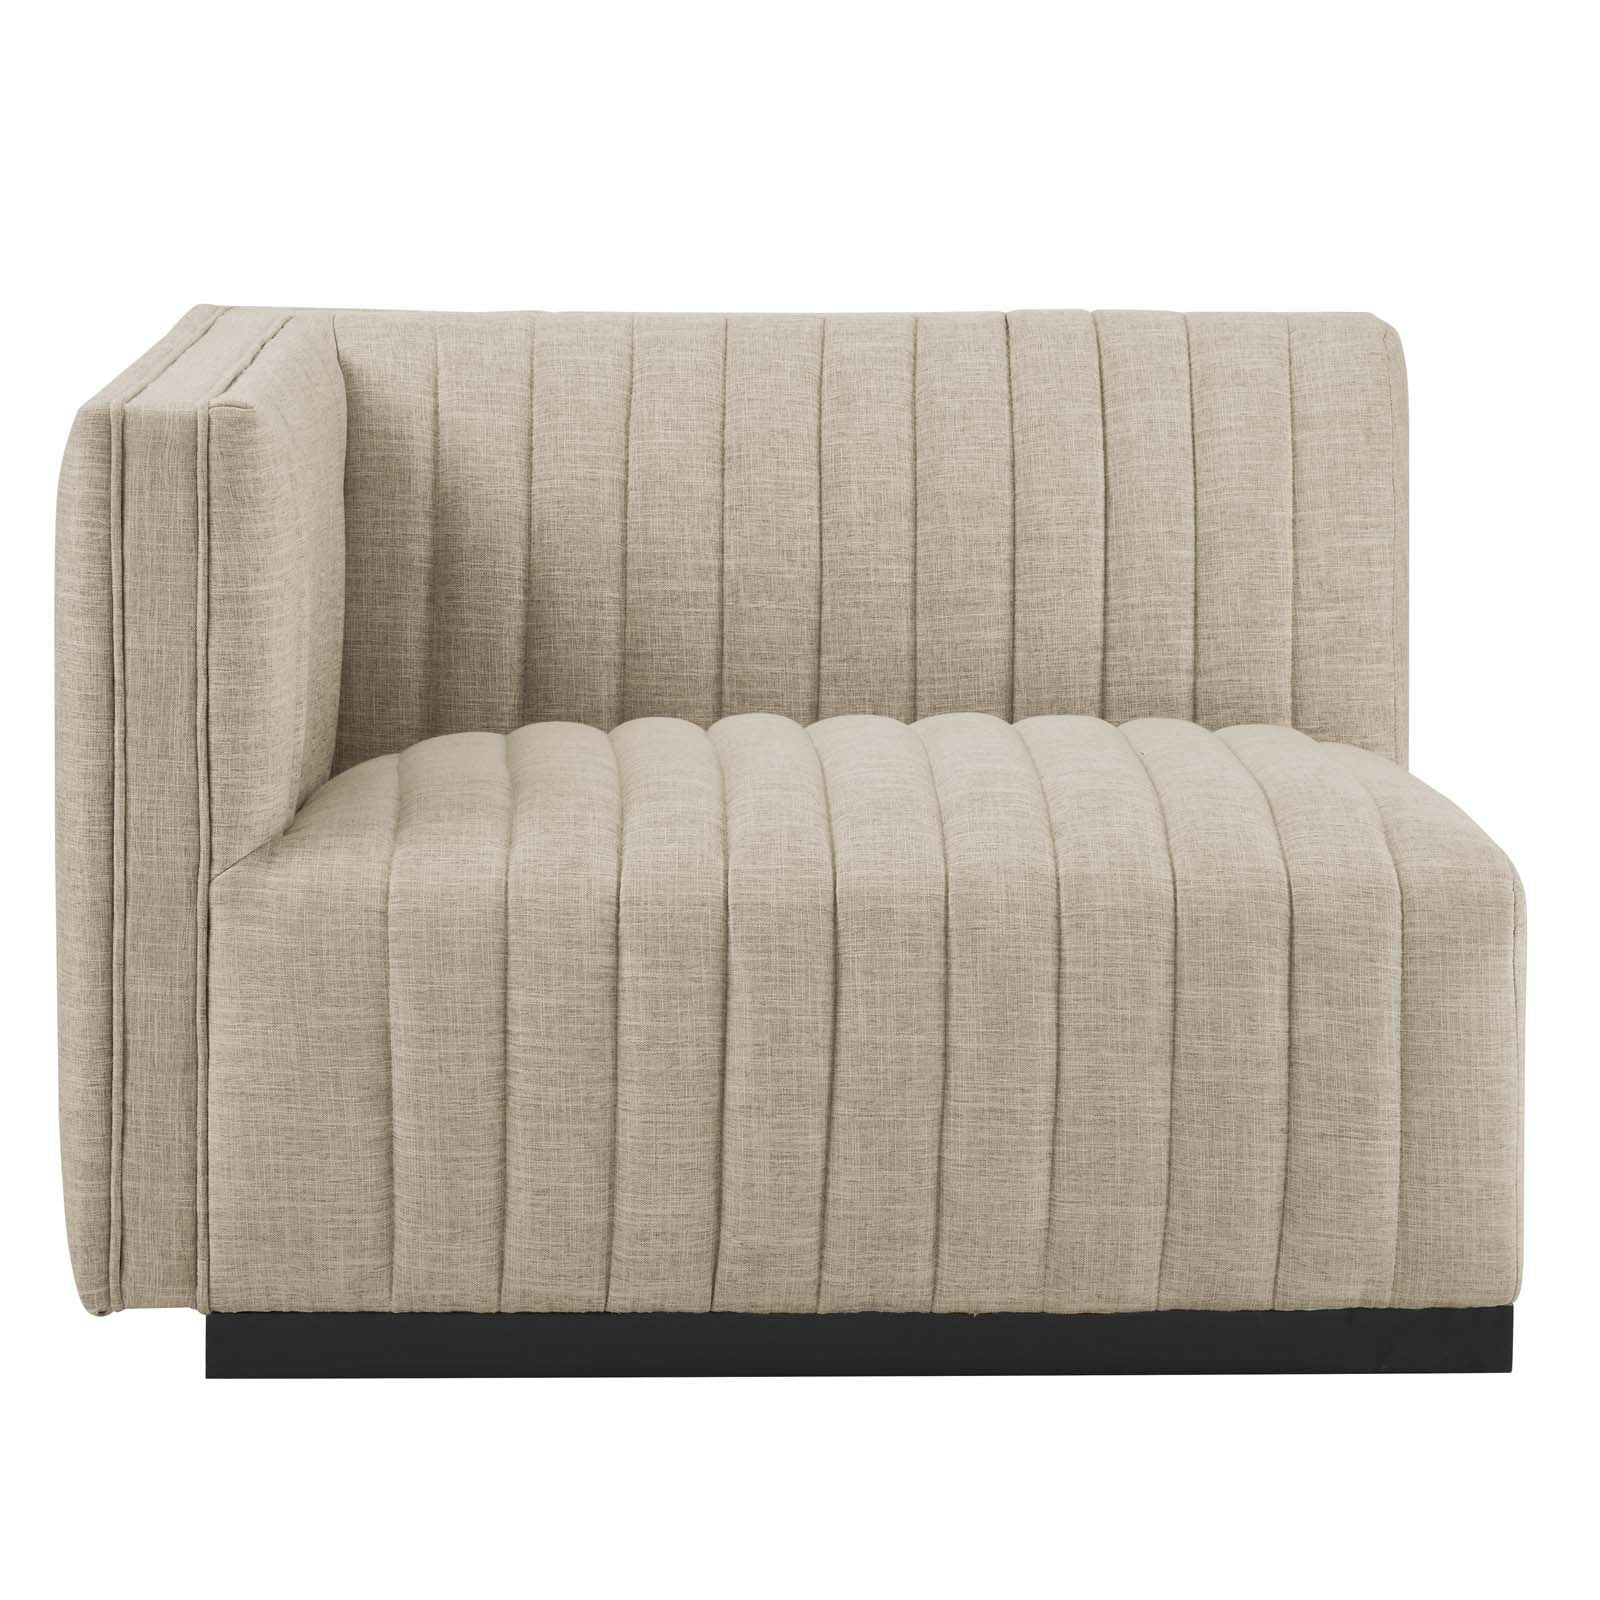 Modway Accent Chairs - Conjure Channel Tufted Upholstered Fabric Left-Arm Chair Black Beige